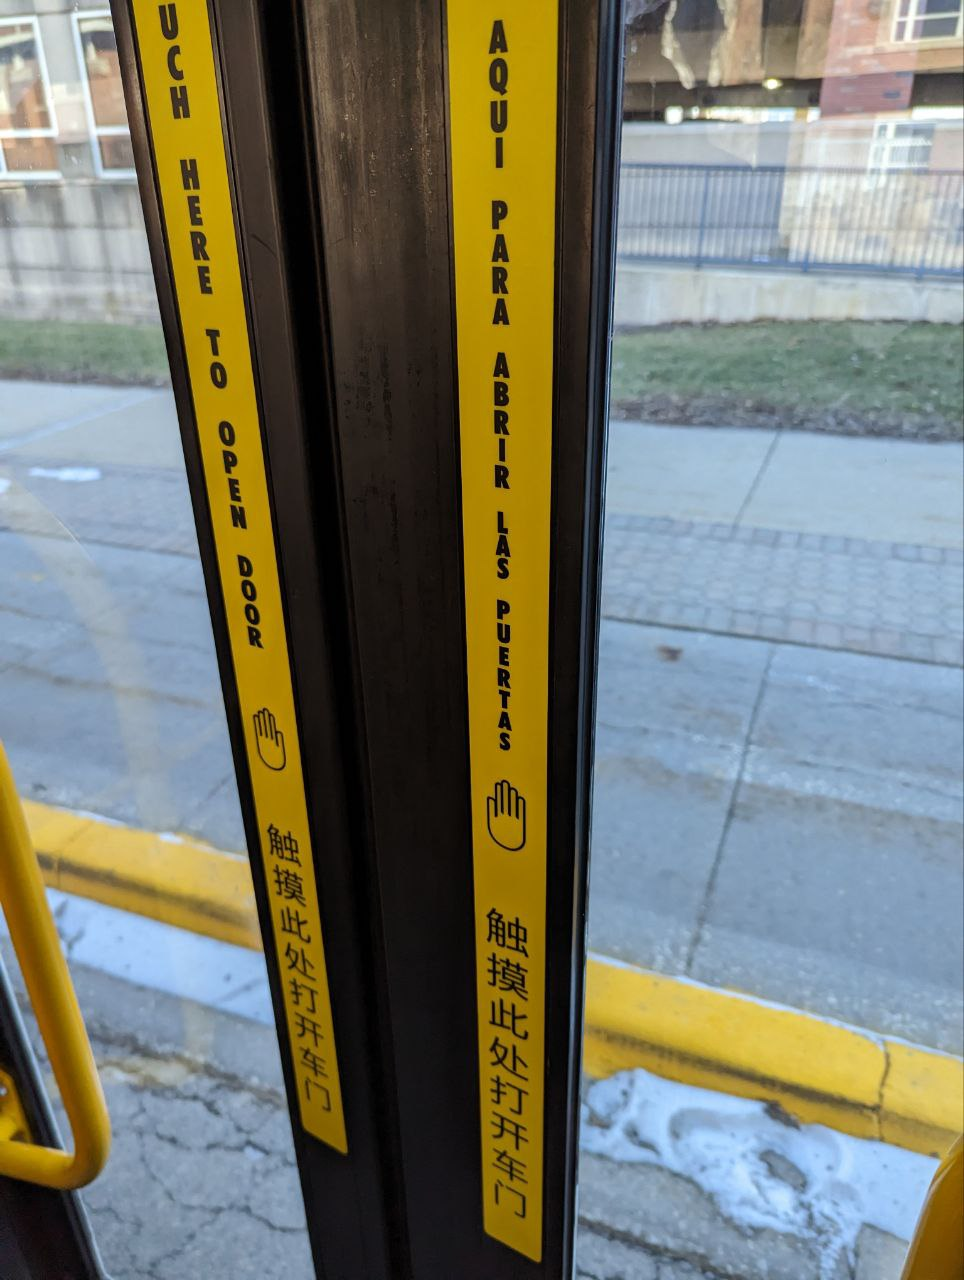 Chinese on the bus doors